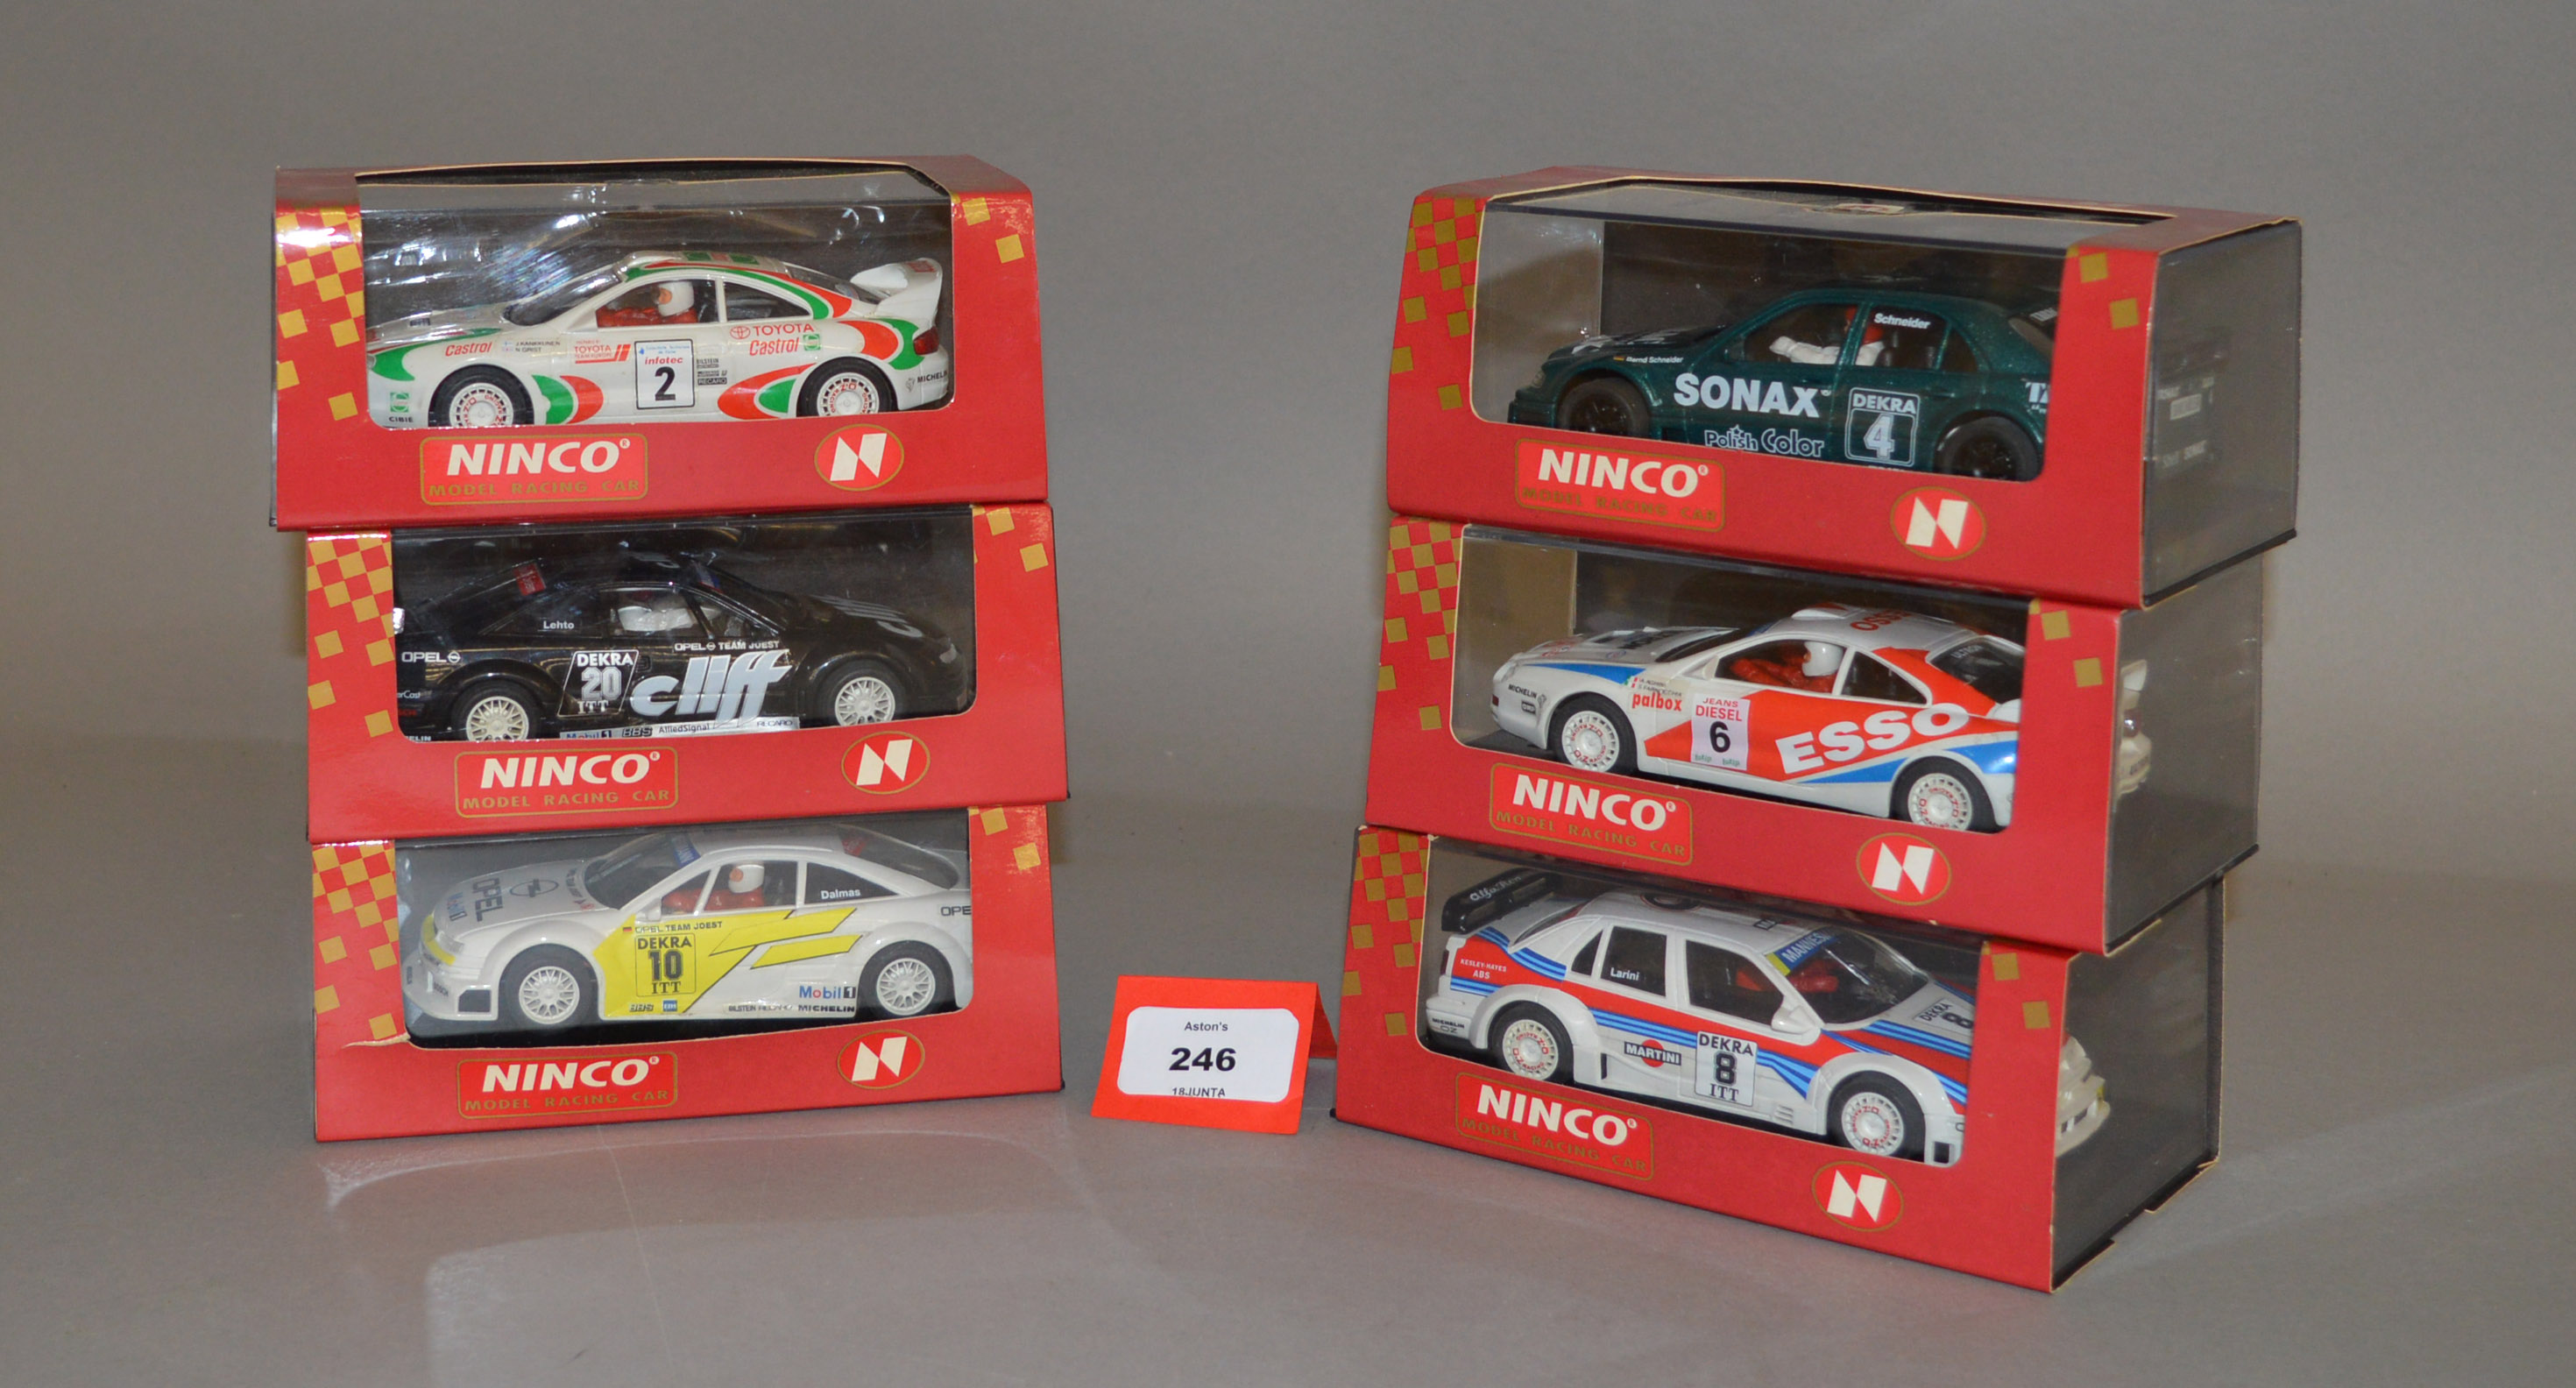 Six Ninco slot cars: 50110; 50106; 50109; 50115; 50112; 50114. Boxed and overall appear VG-E.